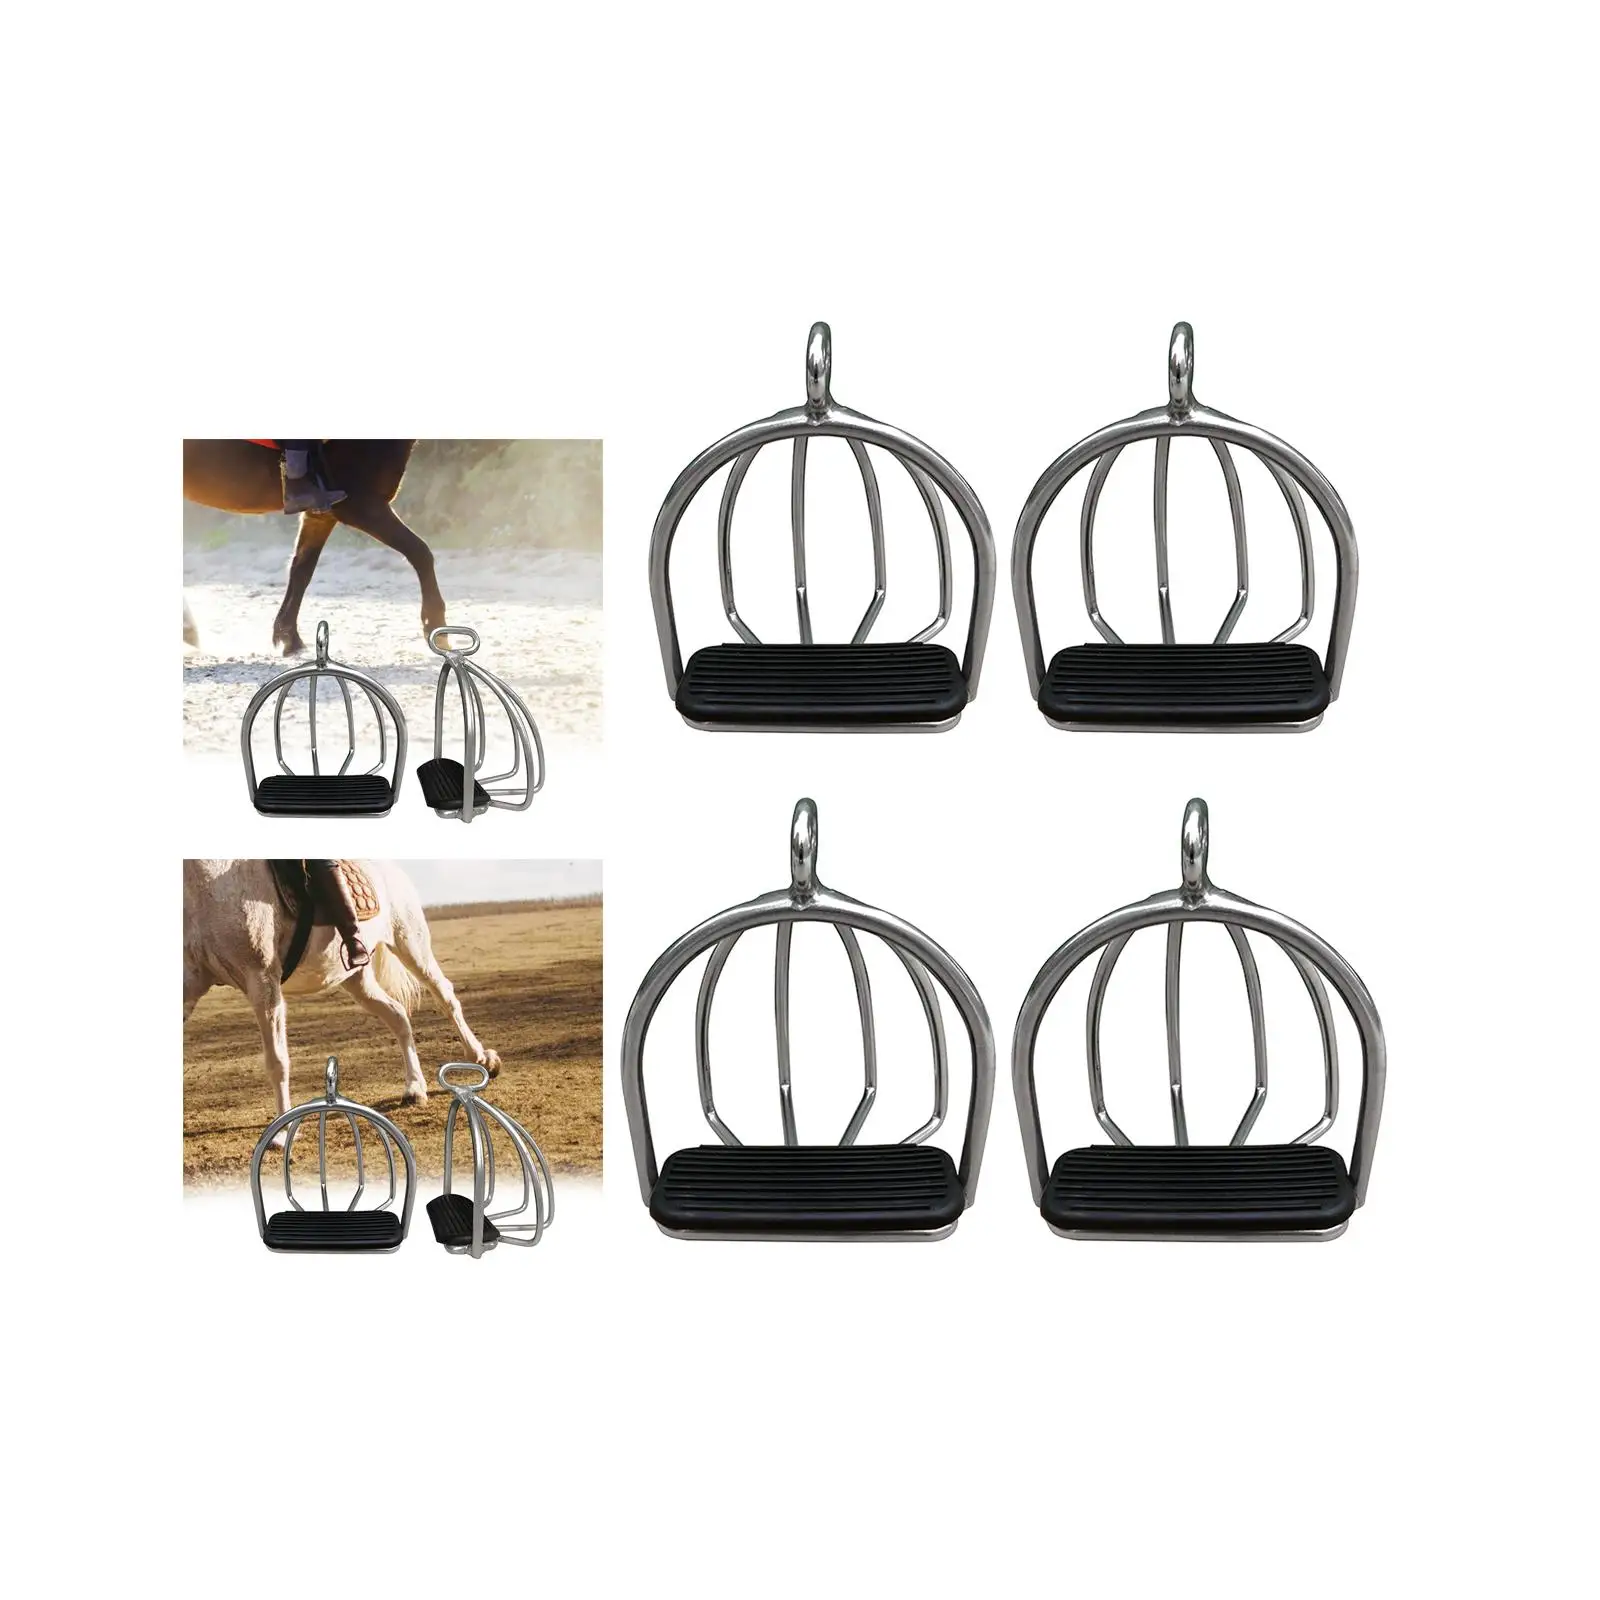 2Pcs Horse Riding Stirrups Anti-Skid Equestrian Lightweight Training Tool for Horse Riding Outdoor Sports Adults Supplies Kids